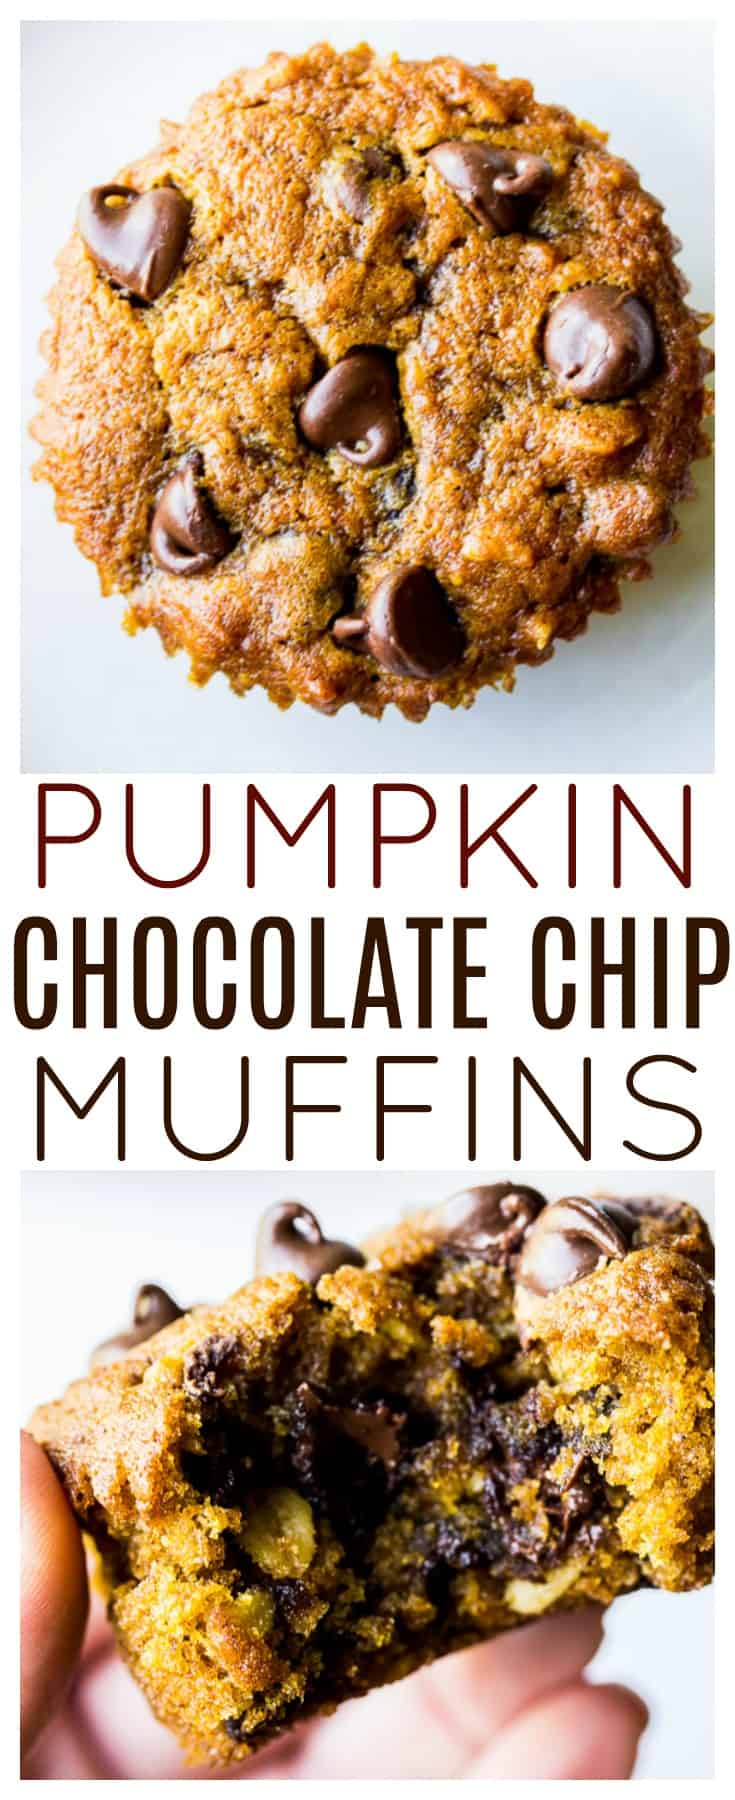 Pumpkin Chocolate Chip Muffins - every bite of these Pumpkin Muffins is bursting with an amazing combination of pumpkin spice and sweet chocolate in a moist, fluffy muffin! They are the perfect Fall dessert recipe! | #dlbrecipes #pumpkinmuffins #pumpkinchocolate #pumpkinchocolatechip #fallbaking